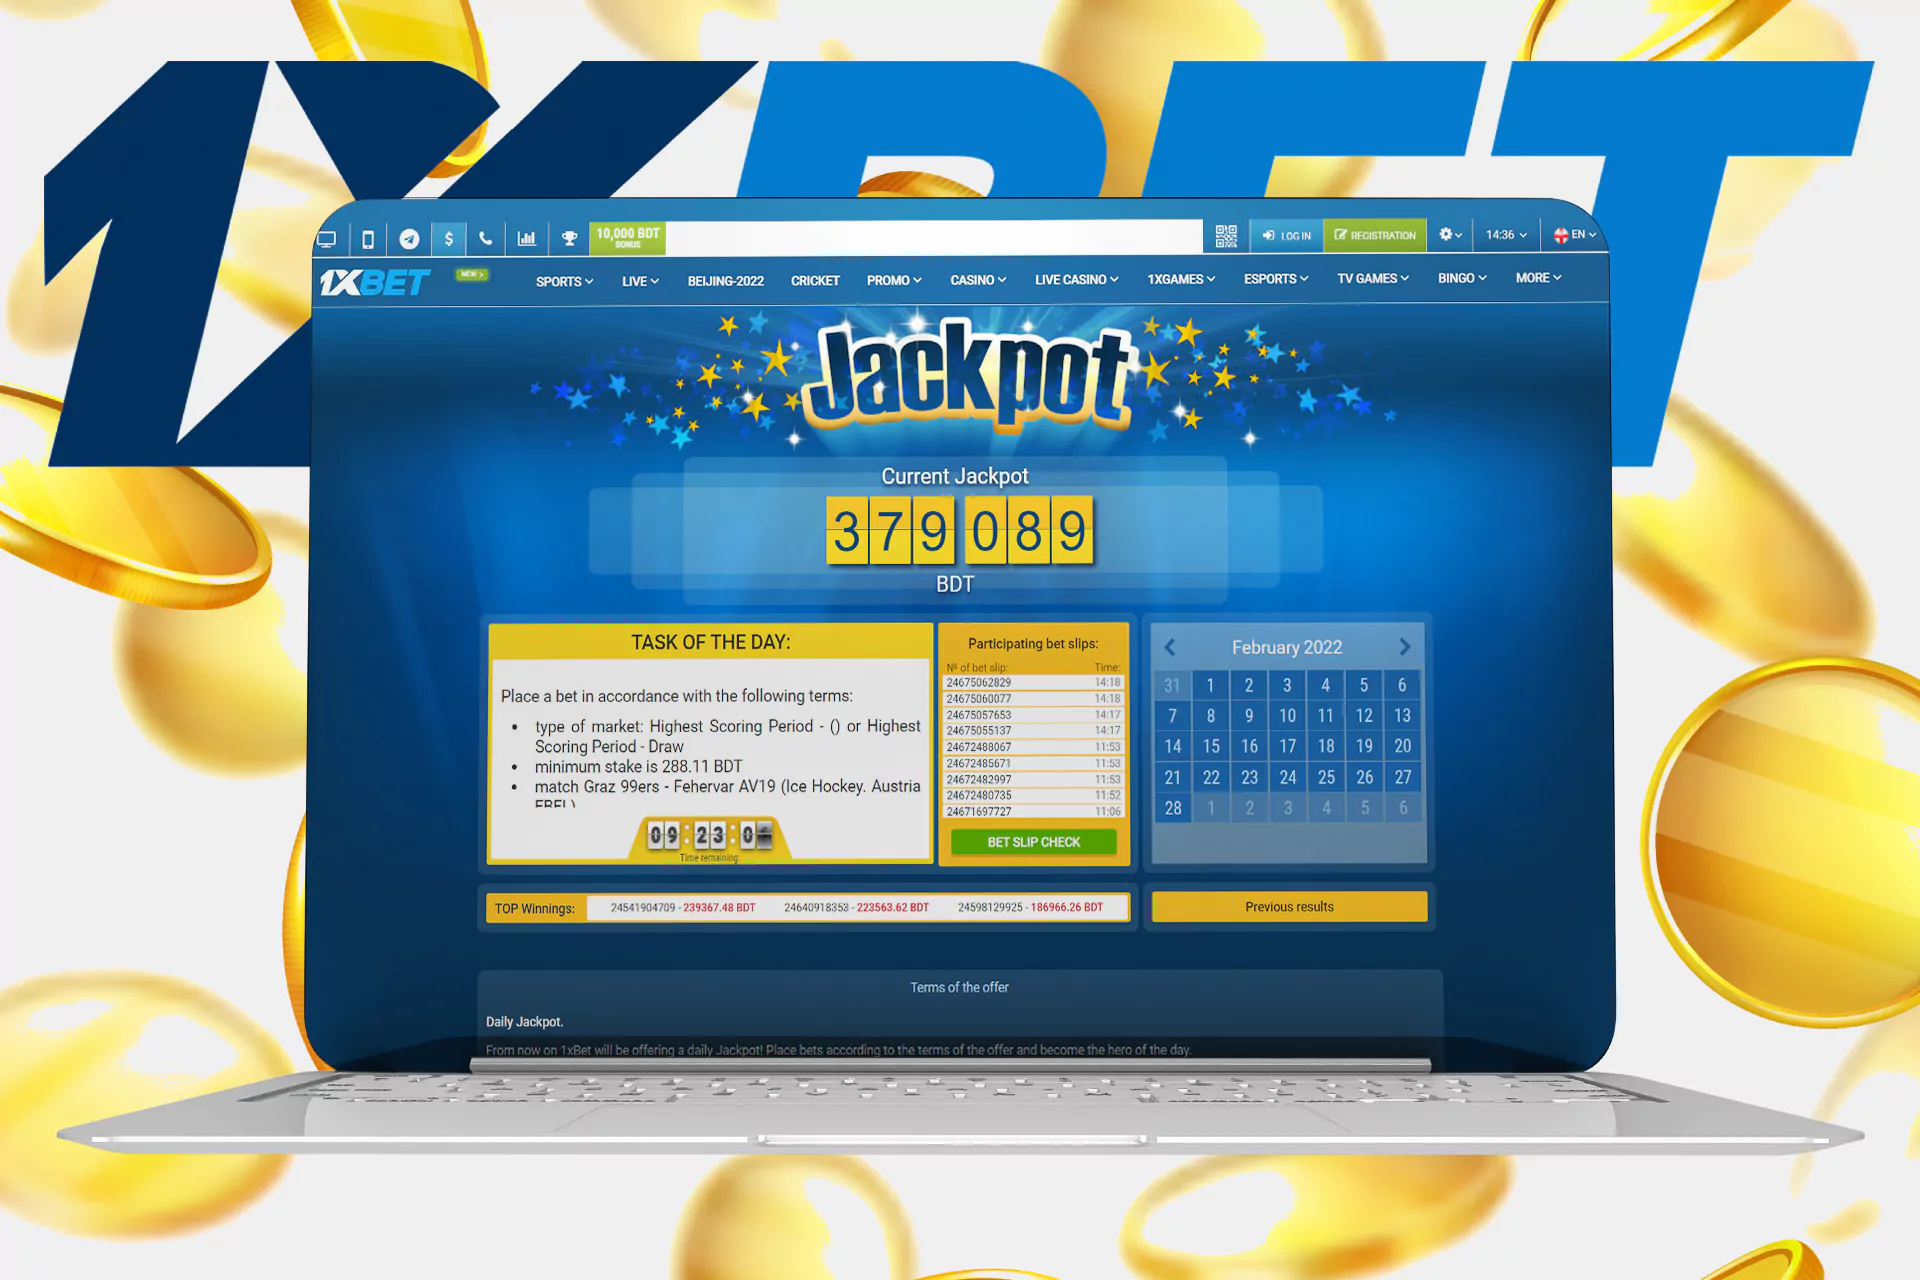 At 1xBet you also can check your fortune in a lottery of the Jackpot.